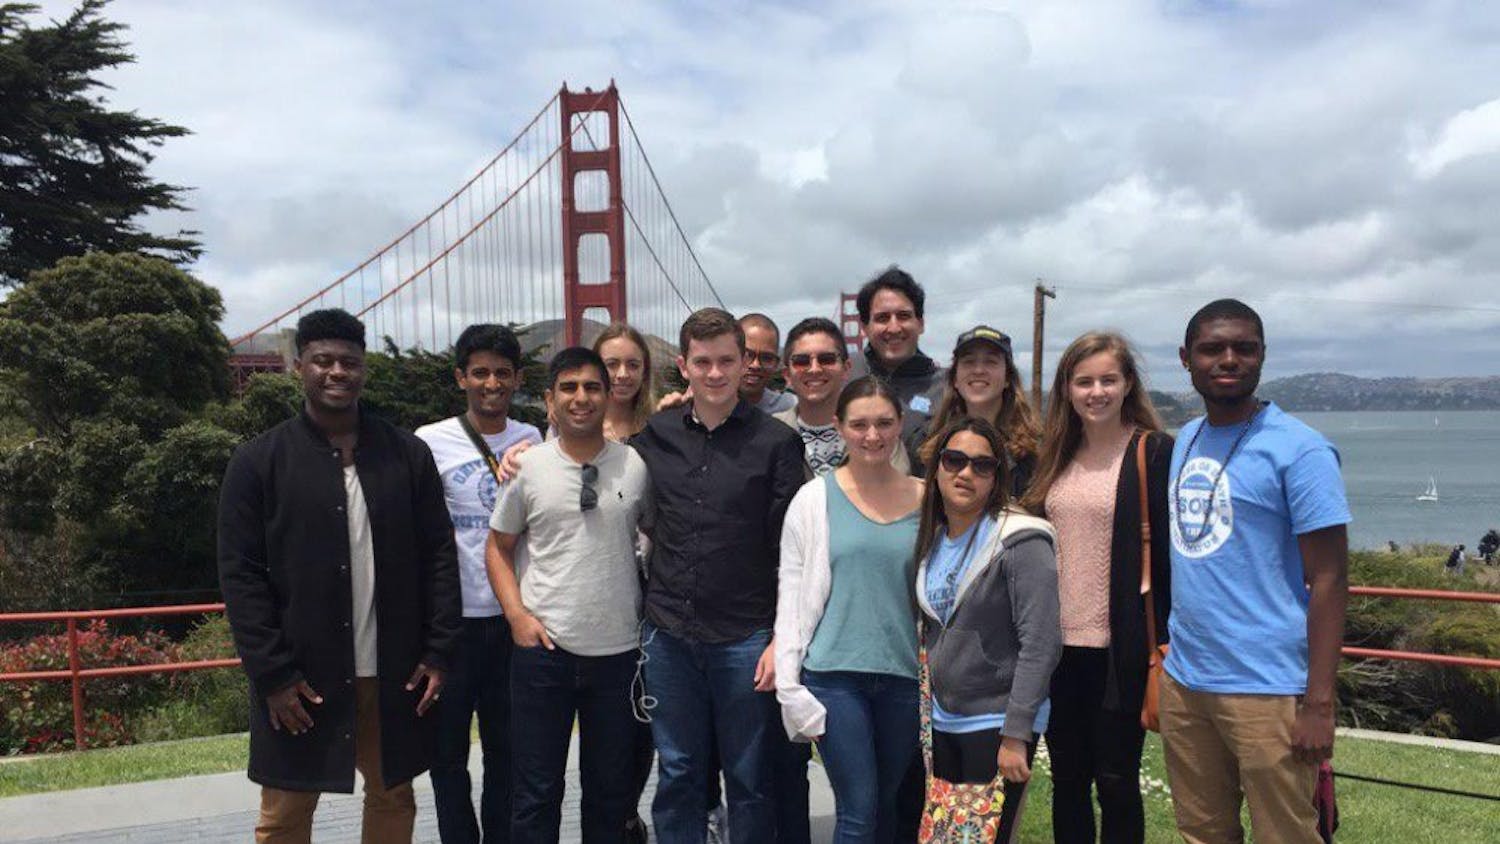 A study abroad program takes students to Silicon Valley for internships. Photo courtesy of Gina Difino.&nbsp;